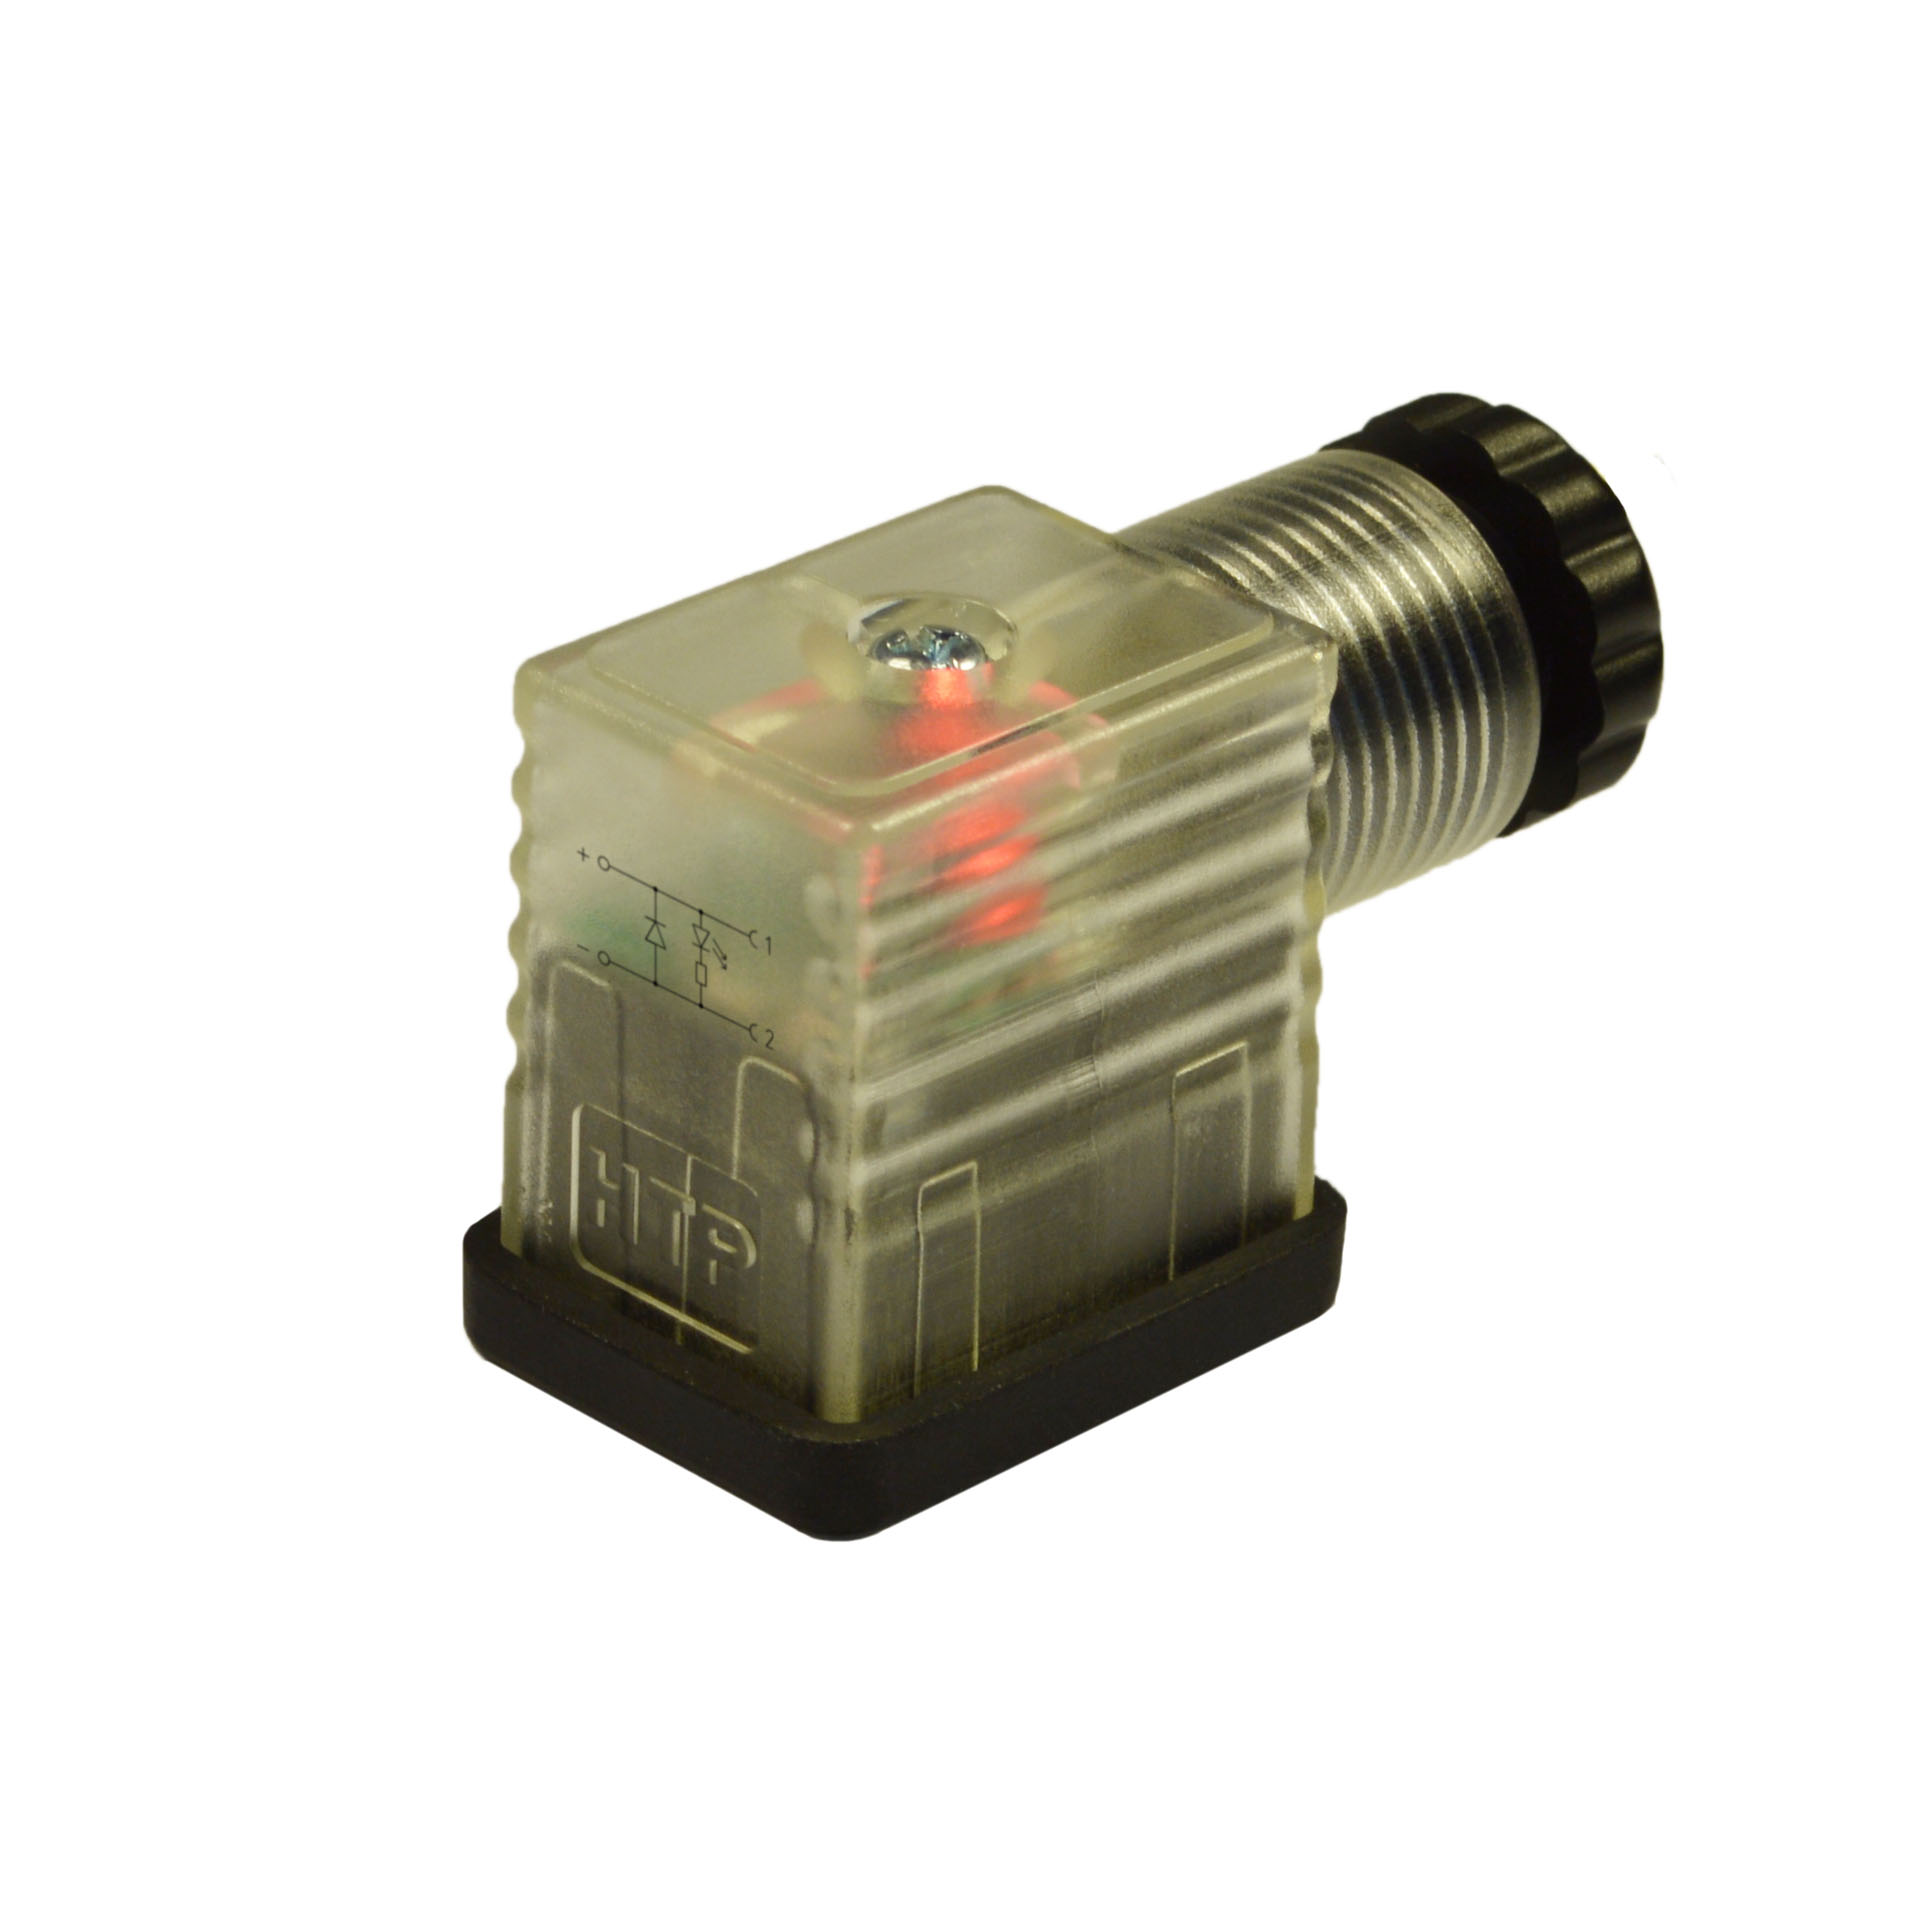 Industrial standard(typeB)field attachable,2p+PE(h.12),red LED+diode,230VAC/DC,PG9